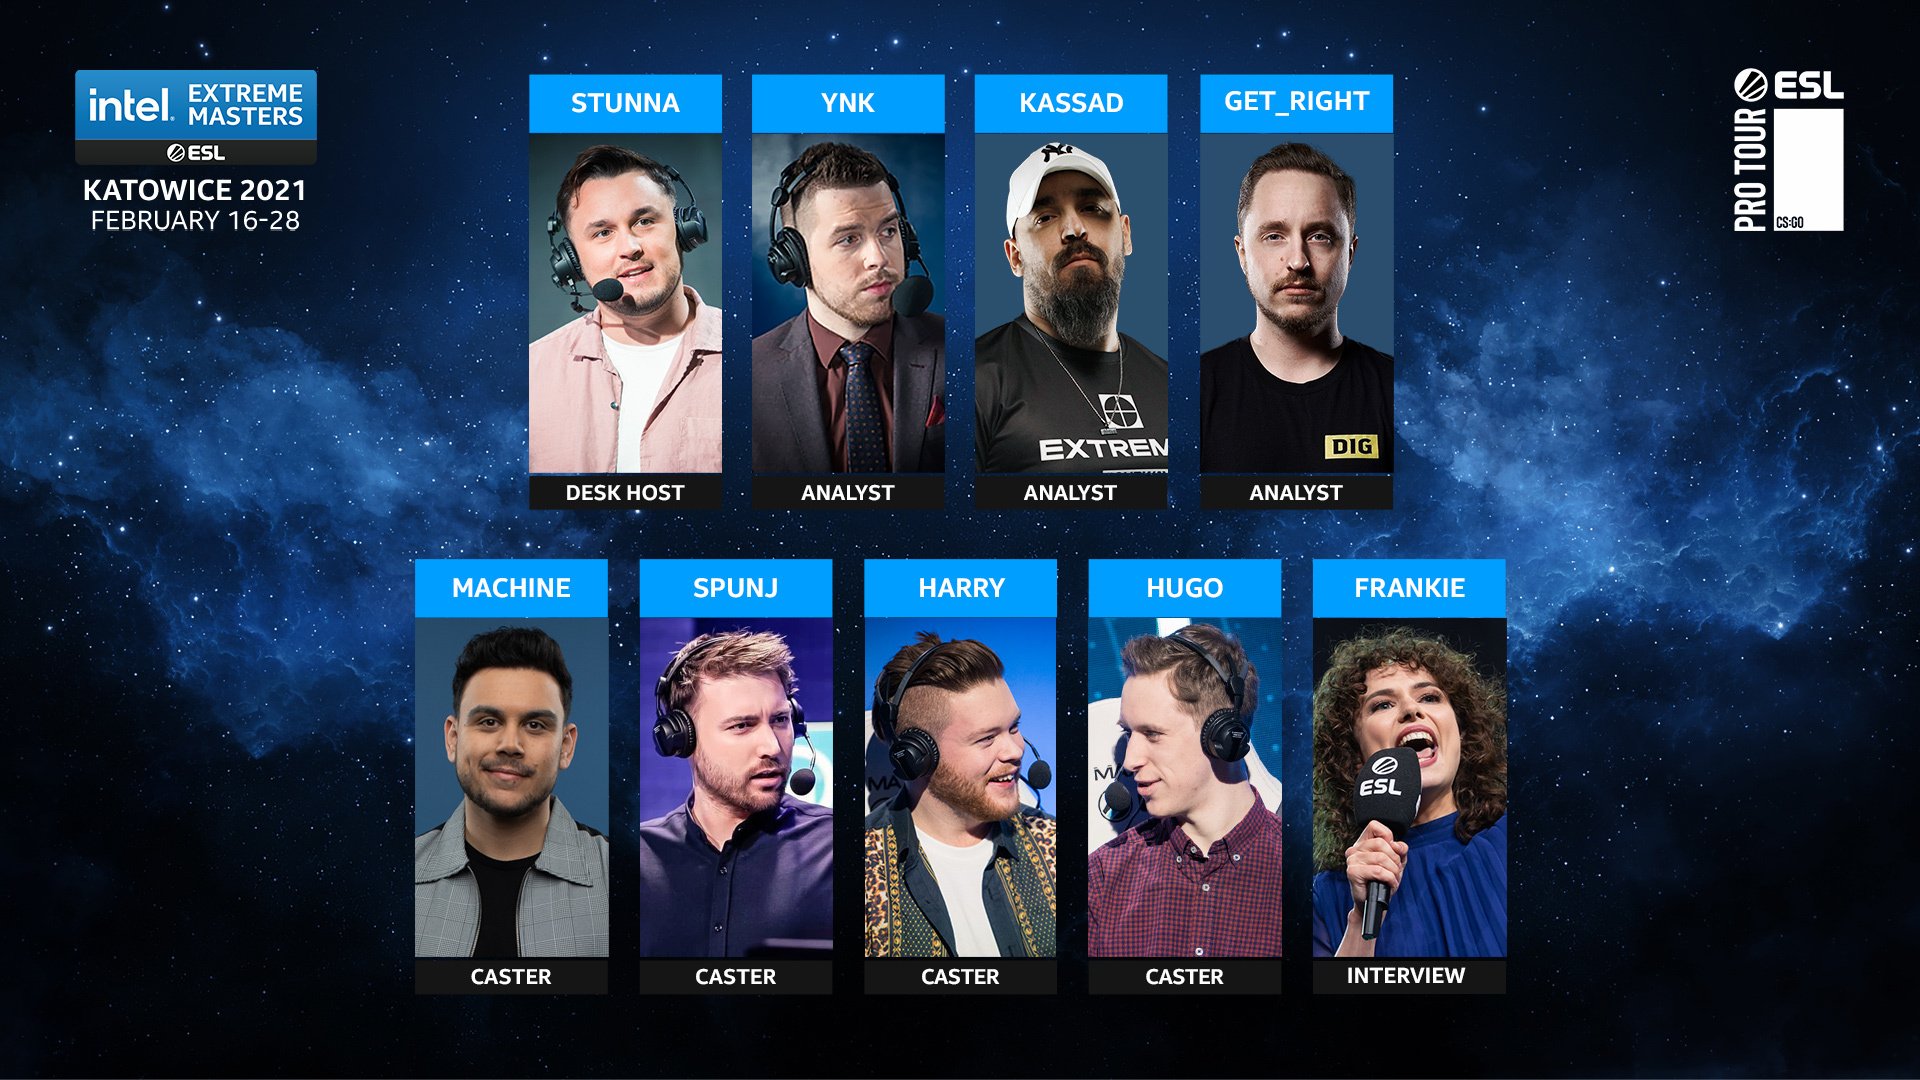 IEM Katowice 2021 talent line-up announced, GeT RiGhT on Analyst Desk